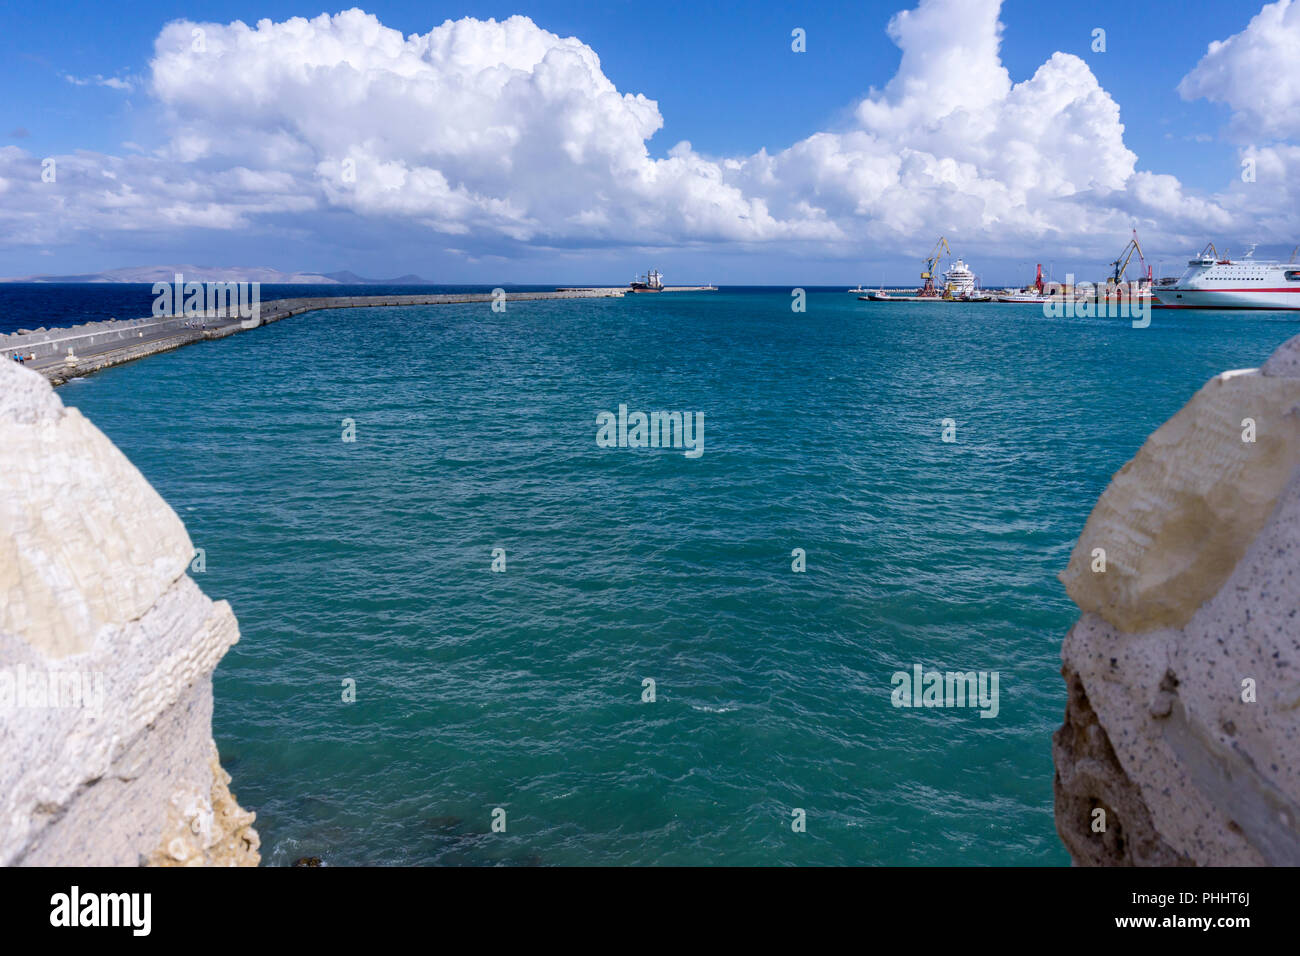 Heraklion, Crete Island / Greece. The port of Heraklion city as seen through the walls of the Venetian Fortress Koules (Castello a Mare) Stock Photo